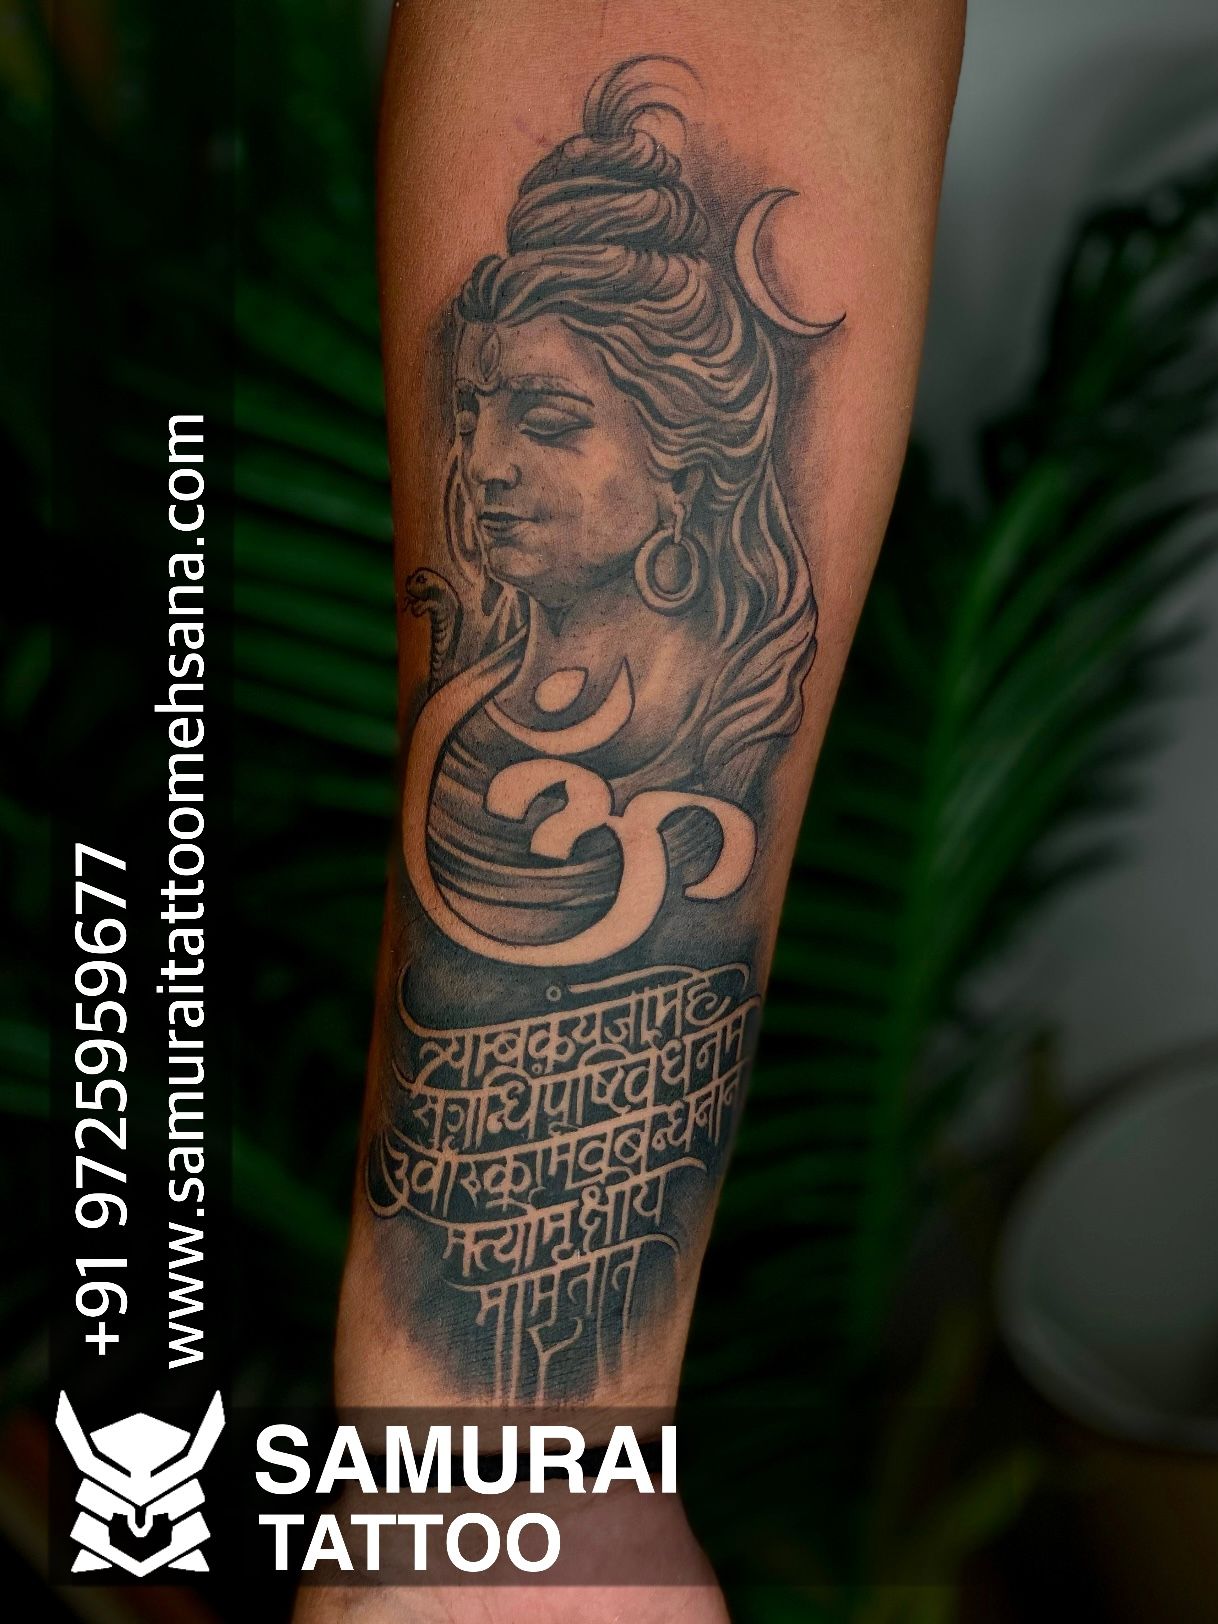 Lord shiva tattoo done by @ronit_sood At @alienstattooindia x Aliens tattoo  chandigarh ....... Share your thoughts in the comments bel... | Instagram